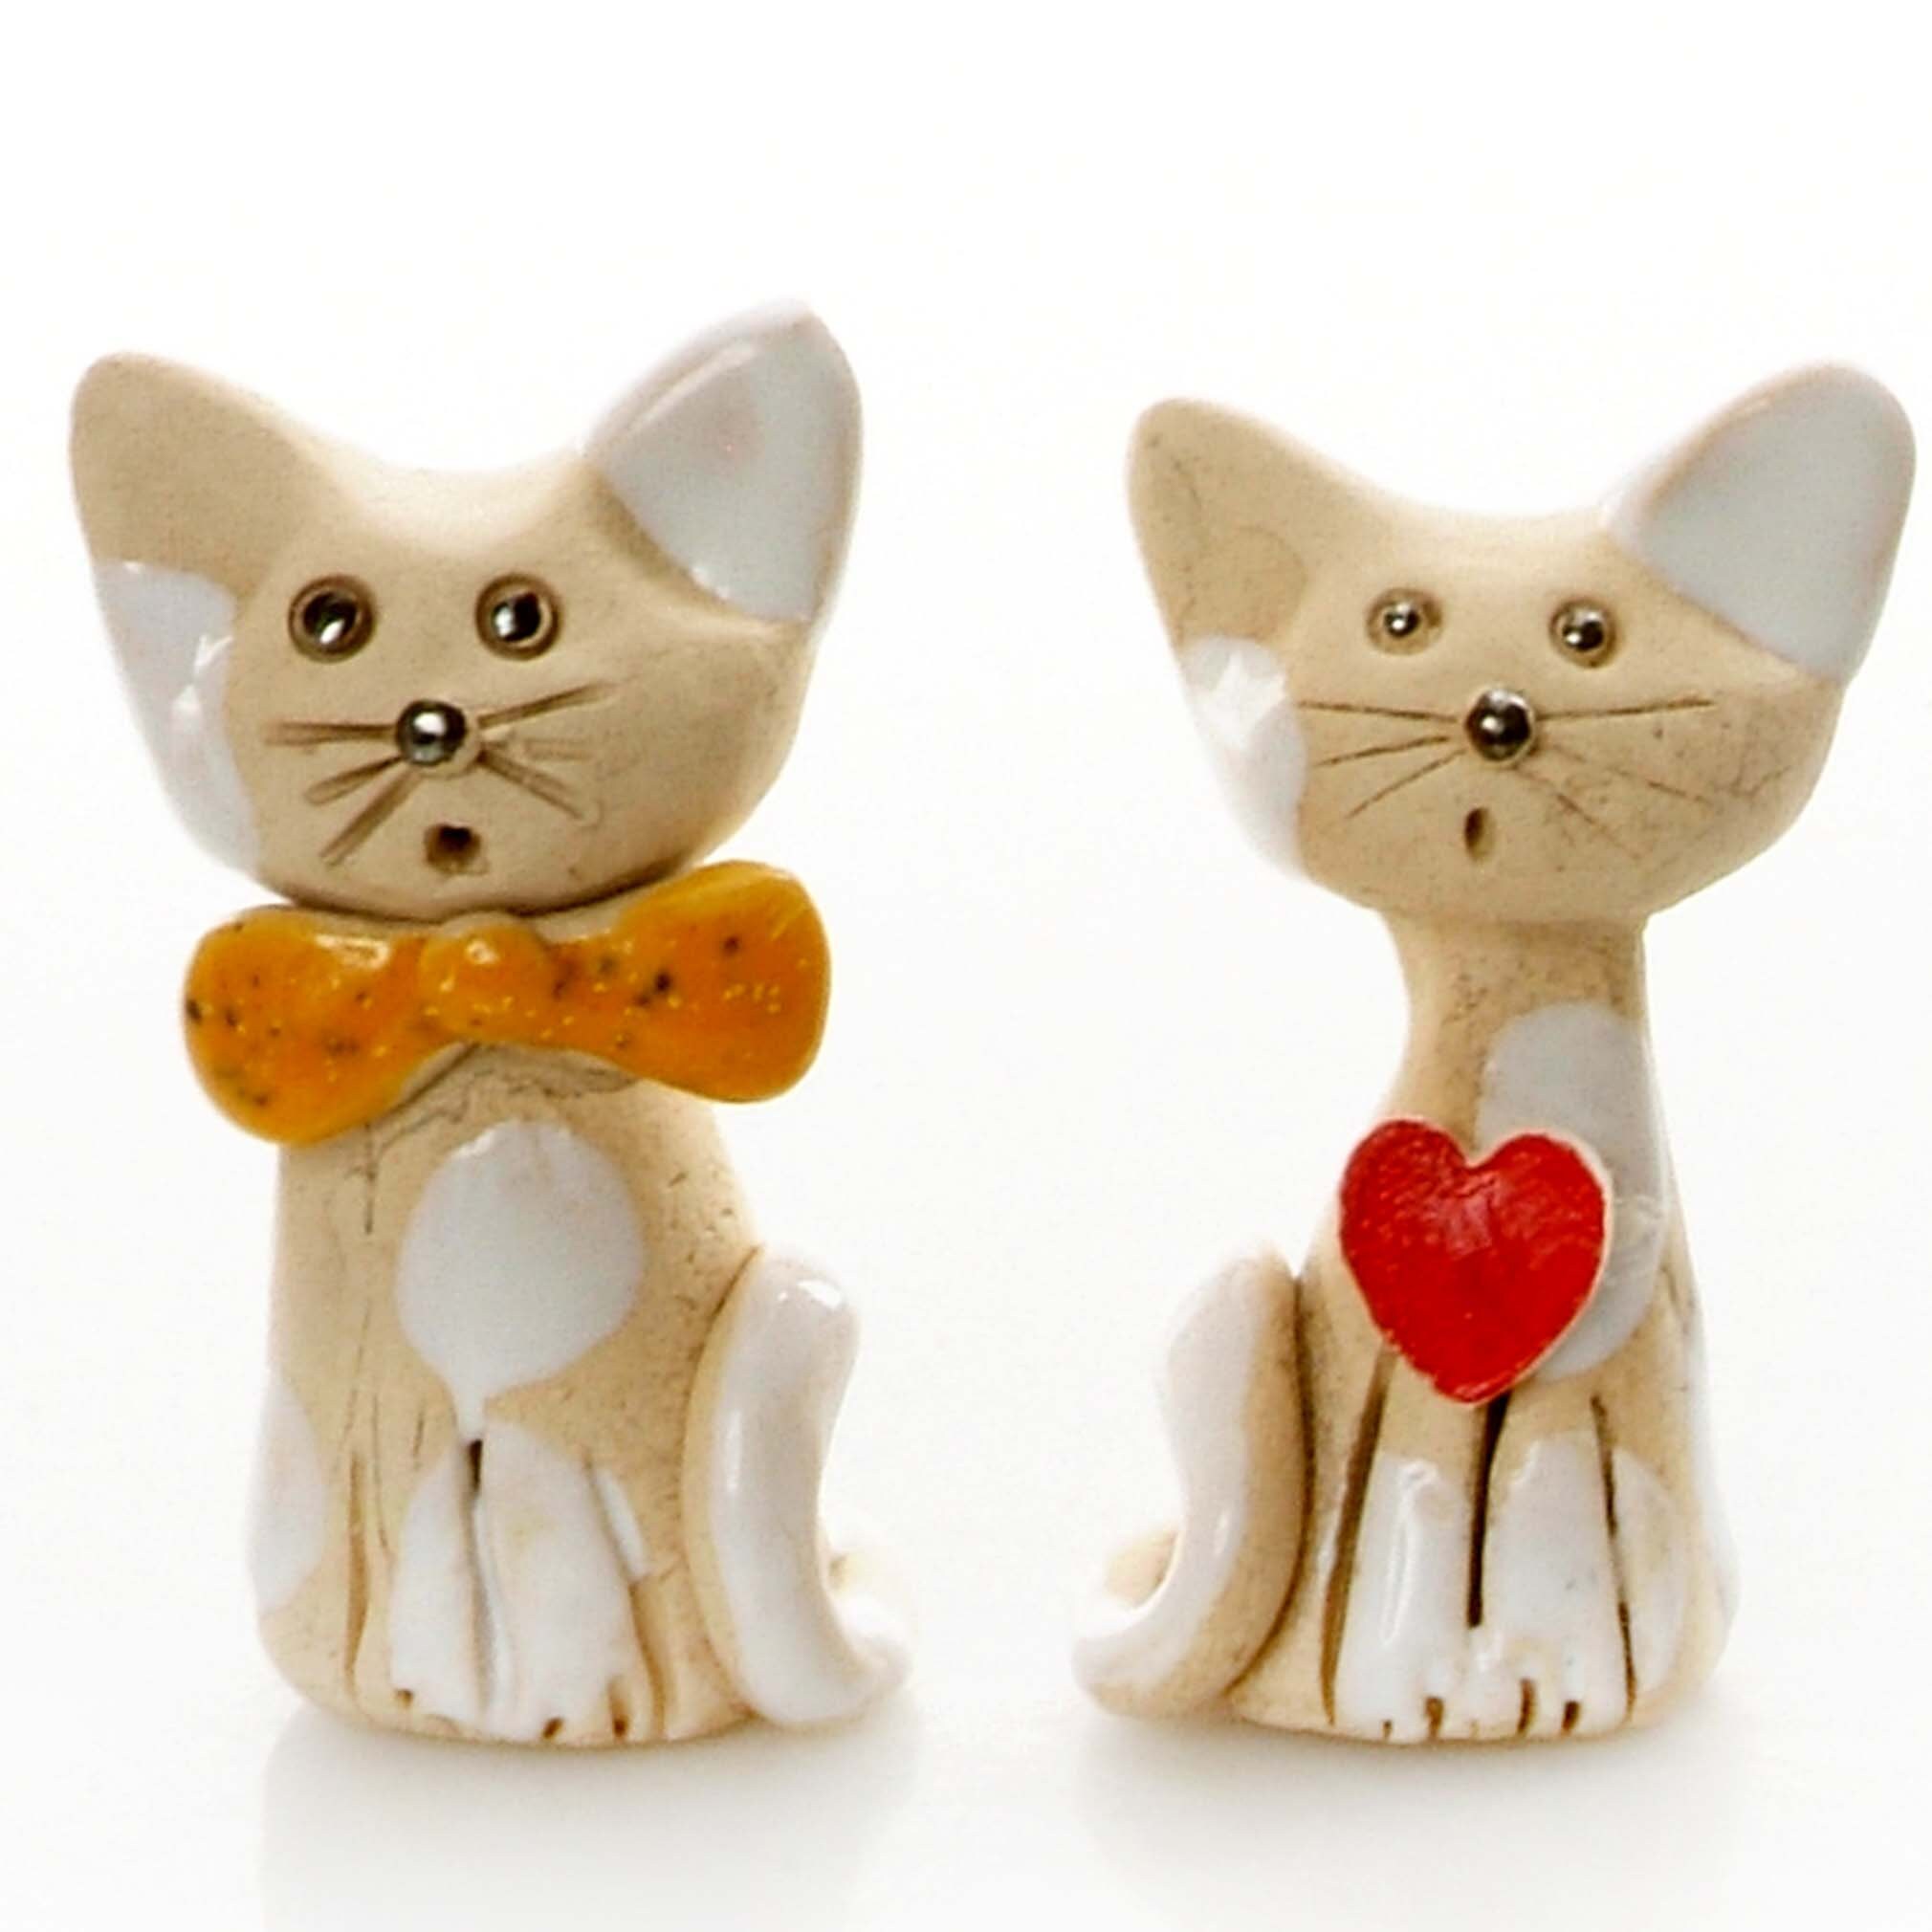 Mr and Mrs Unusual and Quirky Wedding Gift for Cat Lovers Miniature Wdding Favour Hand Made by Anka Christof